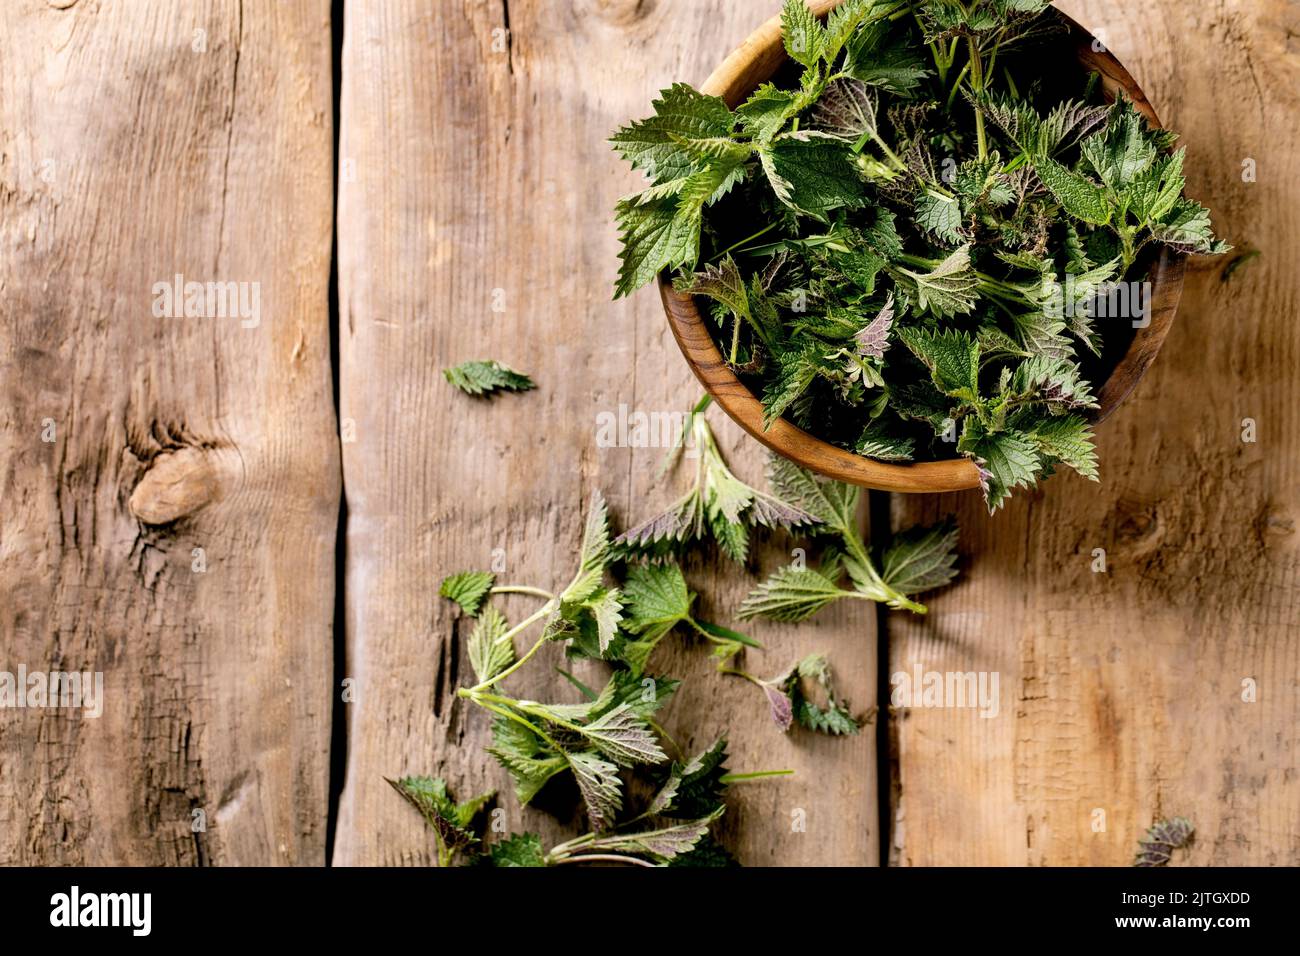 Heap of fresh young organic nettle leaves in wooden bowl on old wood background. Wild plants for spring healthy vegan eating. Top view, copy space Stock Photo